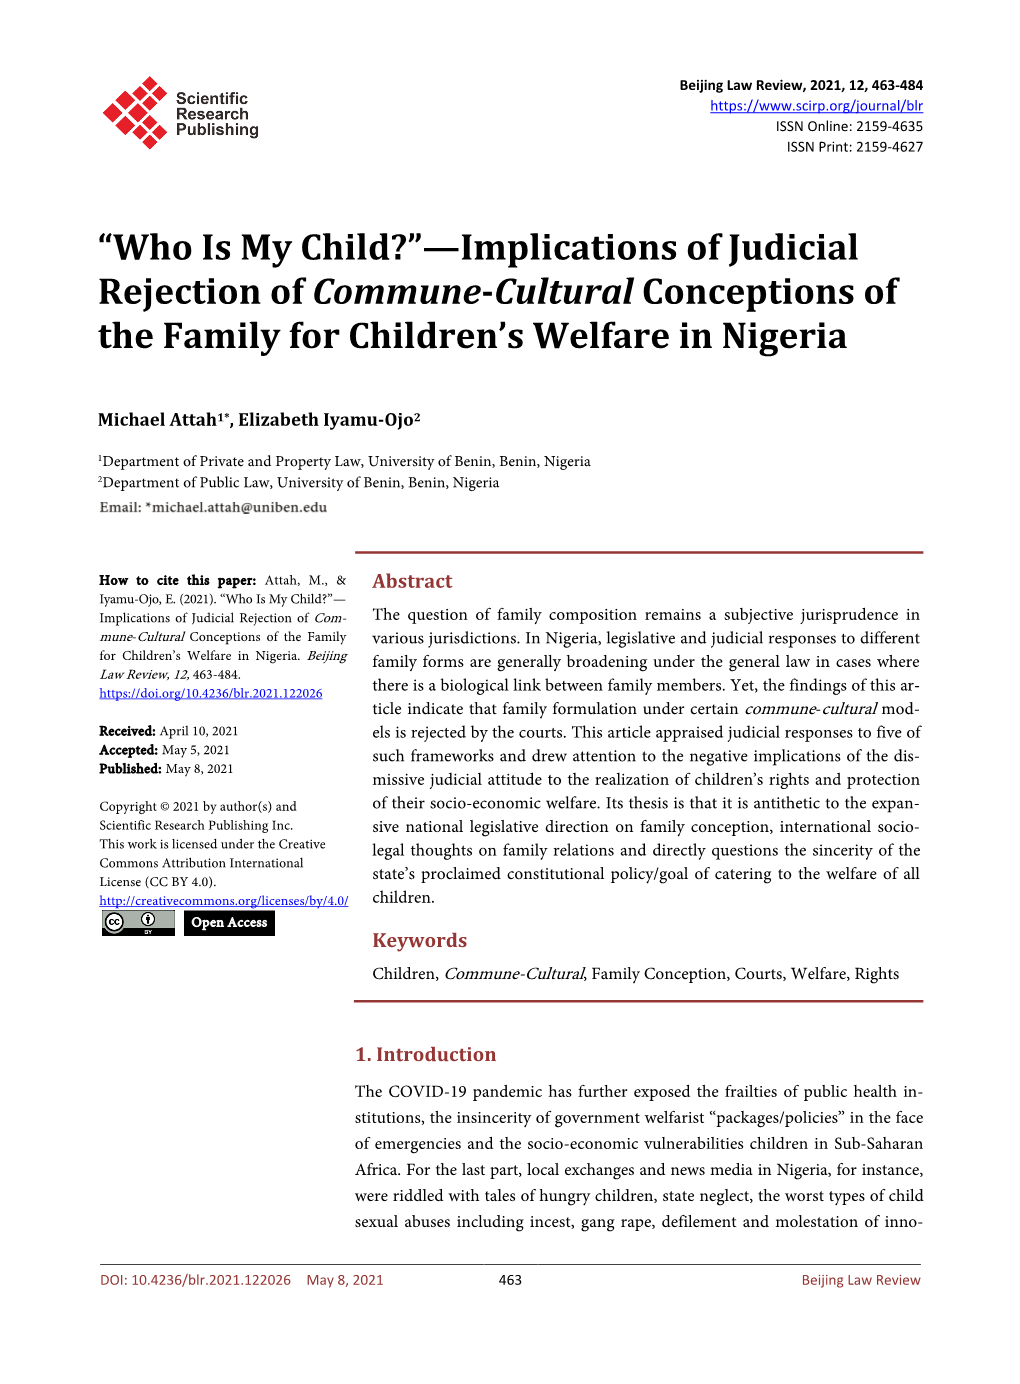 Implications of Judicial Rejection of Commune-Cultural Conceptions of the Family for Children’S Welfare in Nigeria